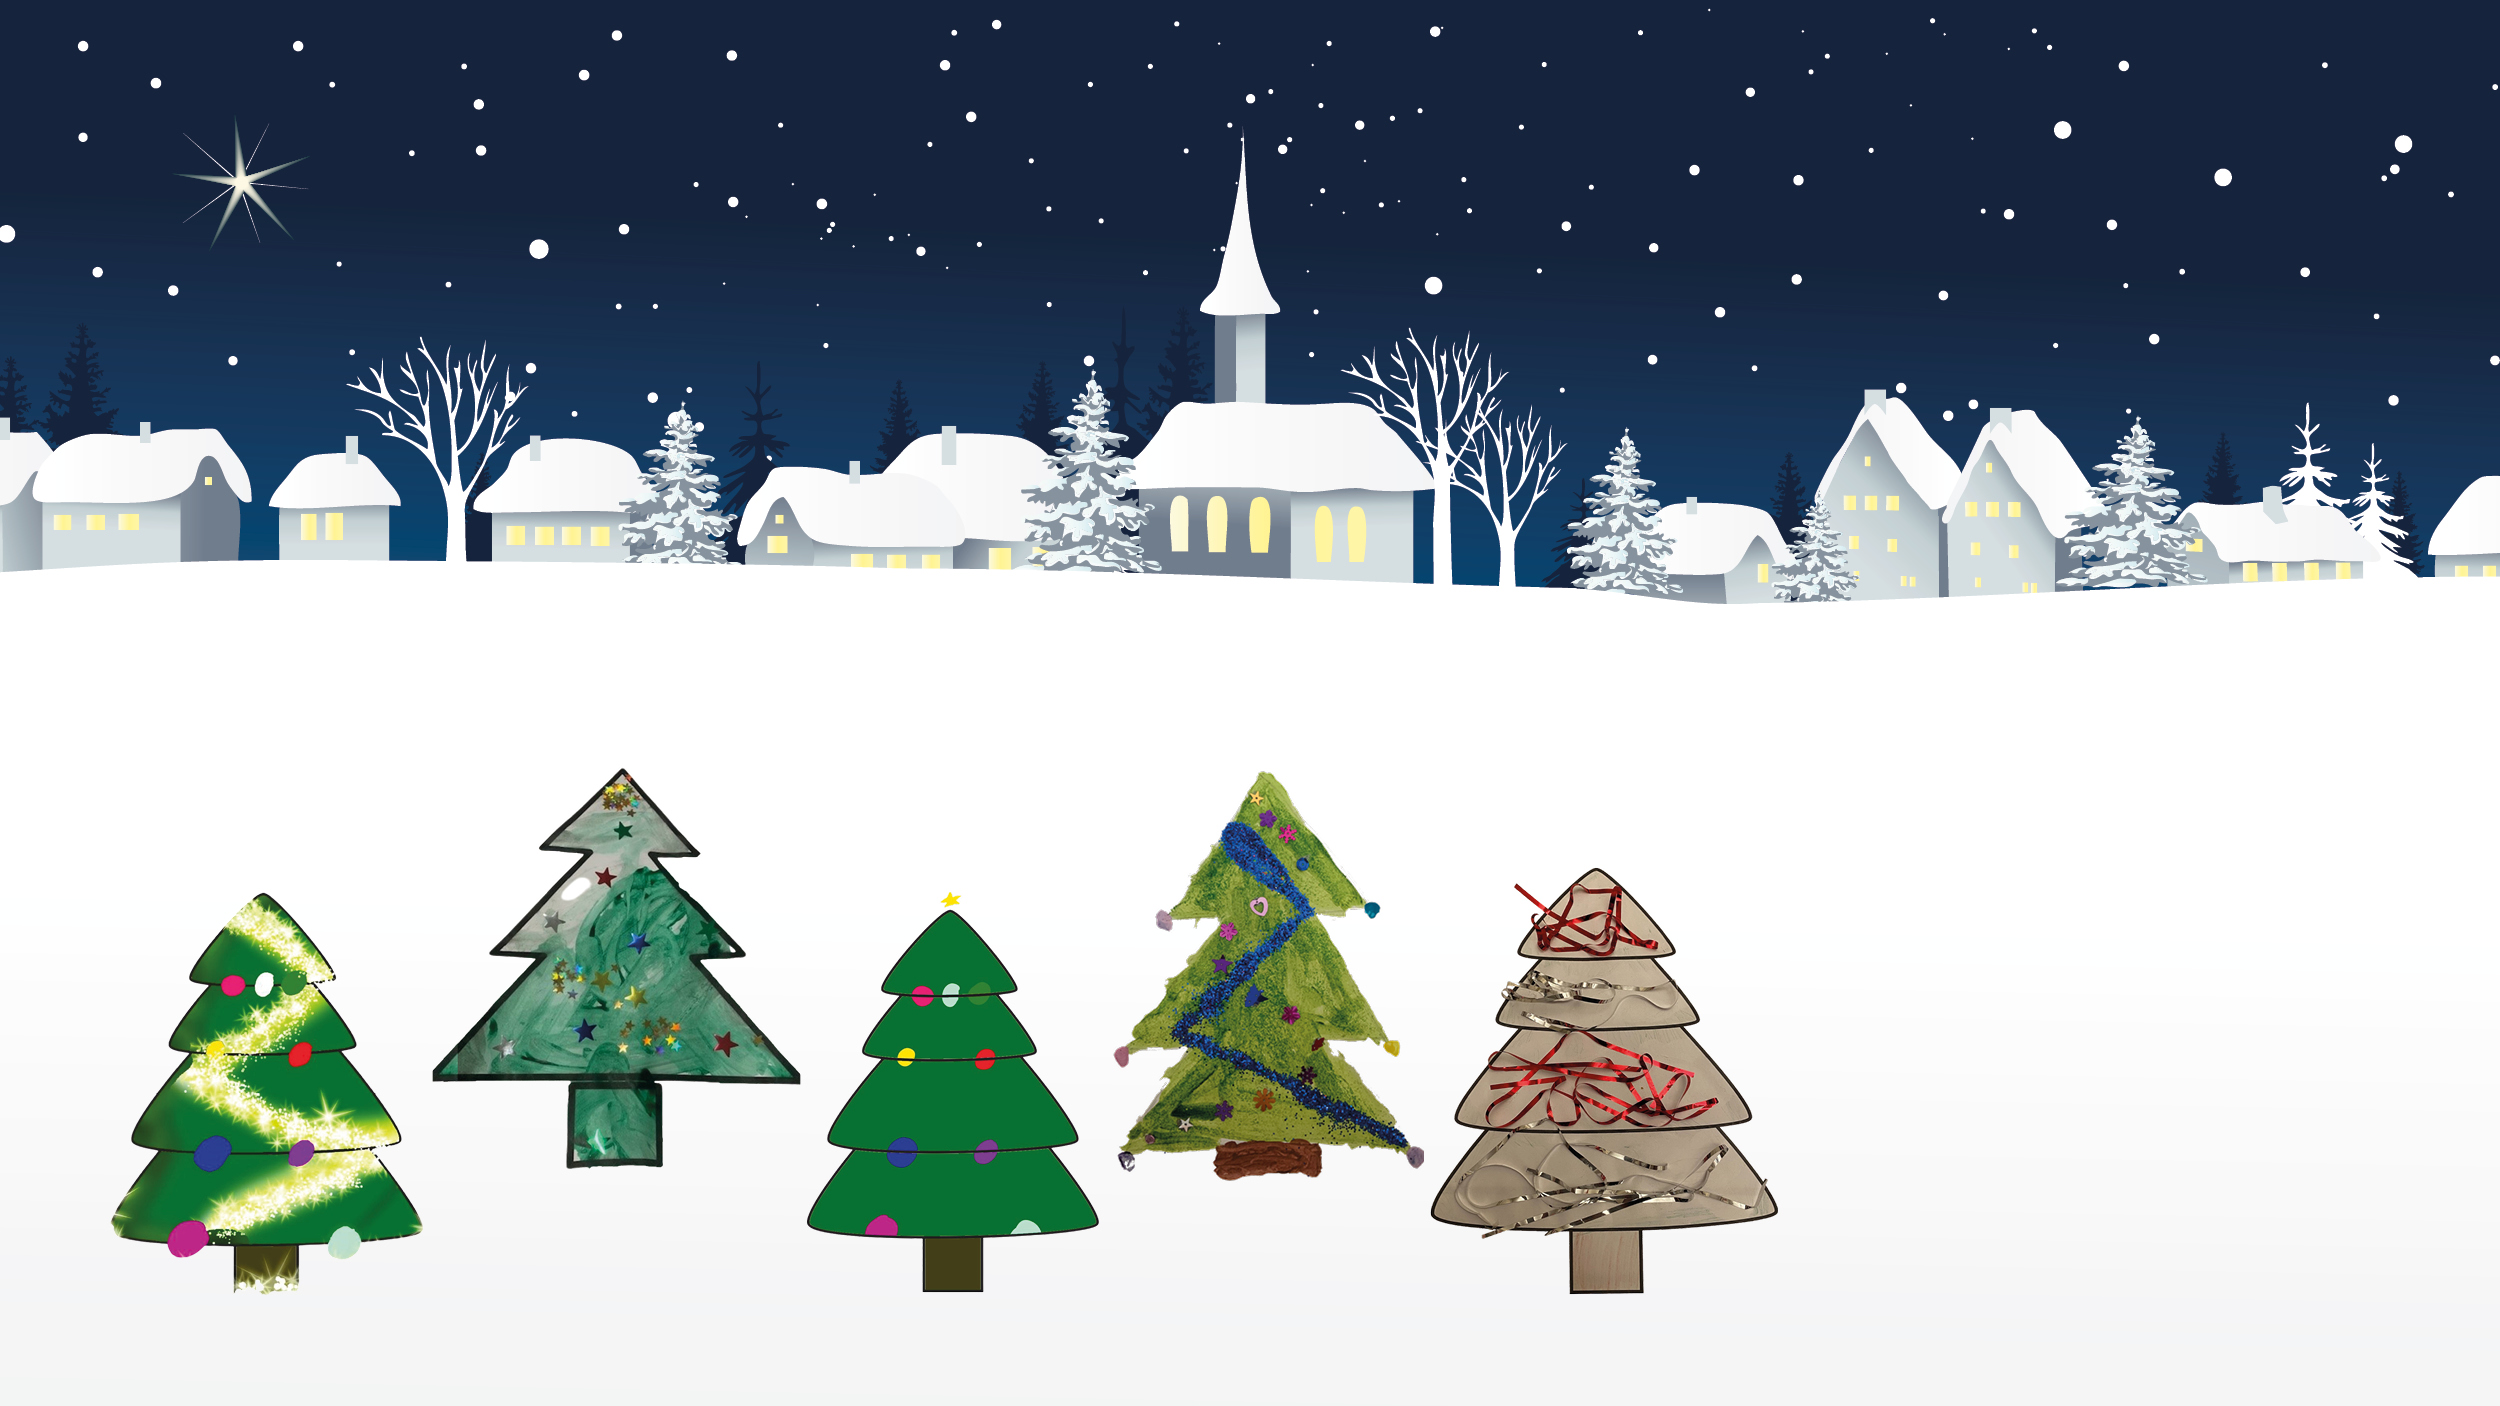 Winter scene with snow covered buildings at the top of the hill and five brightly decorated Christmas trees in the foreground.